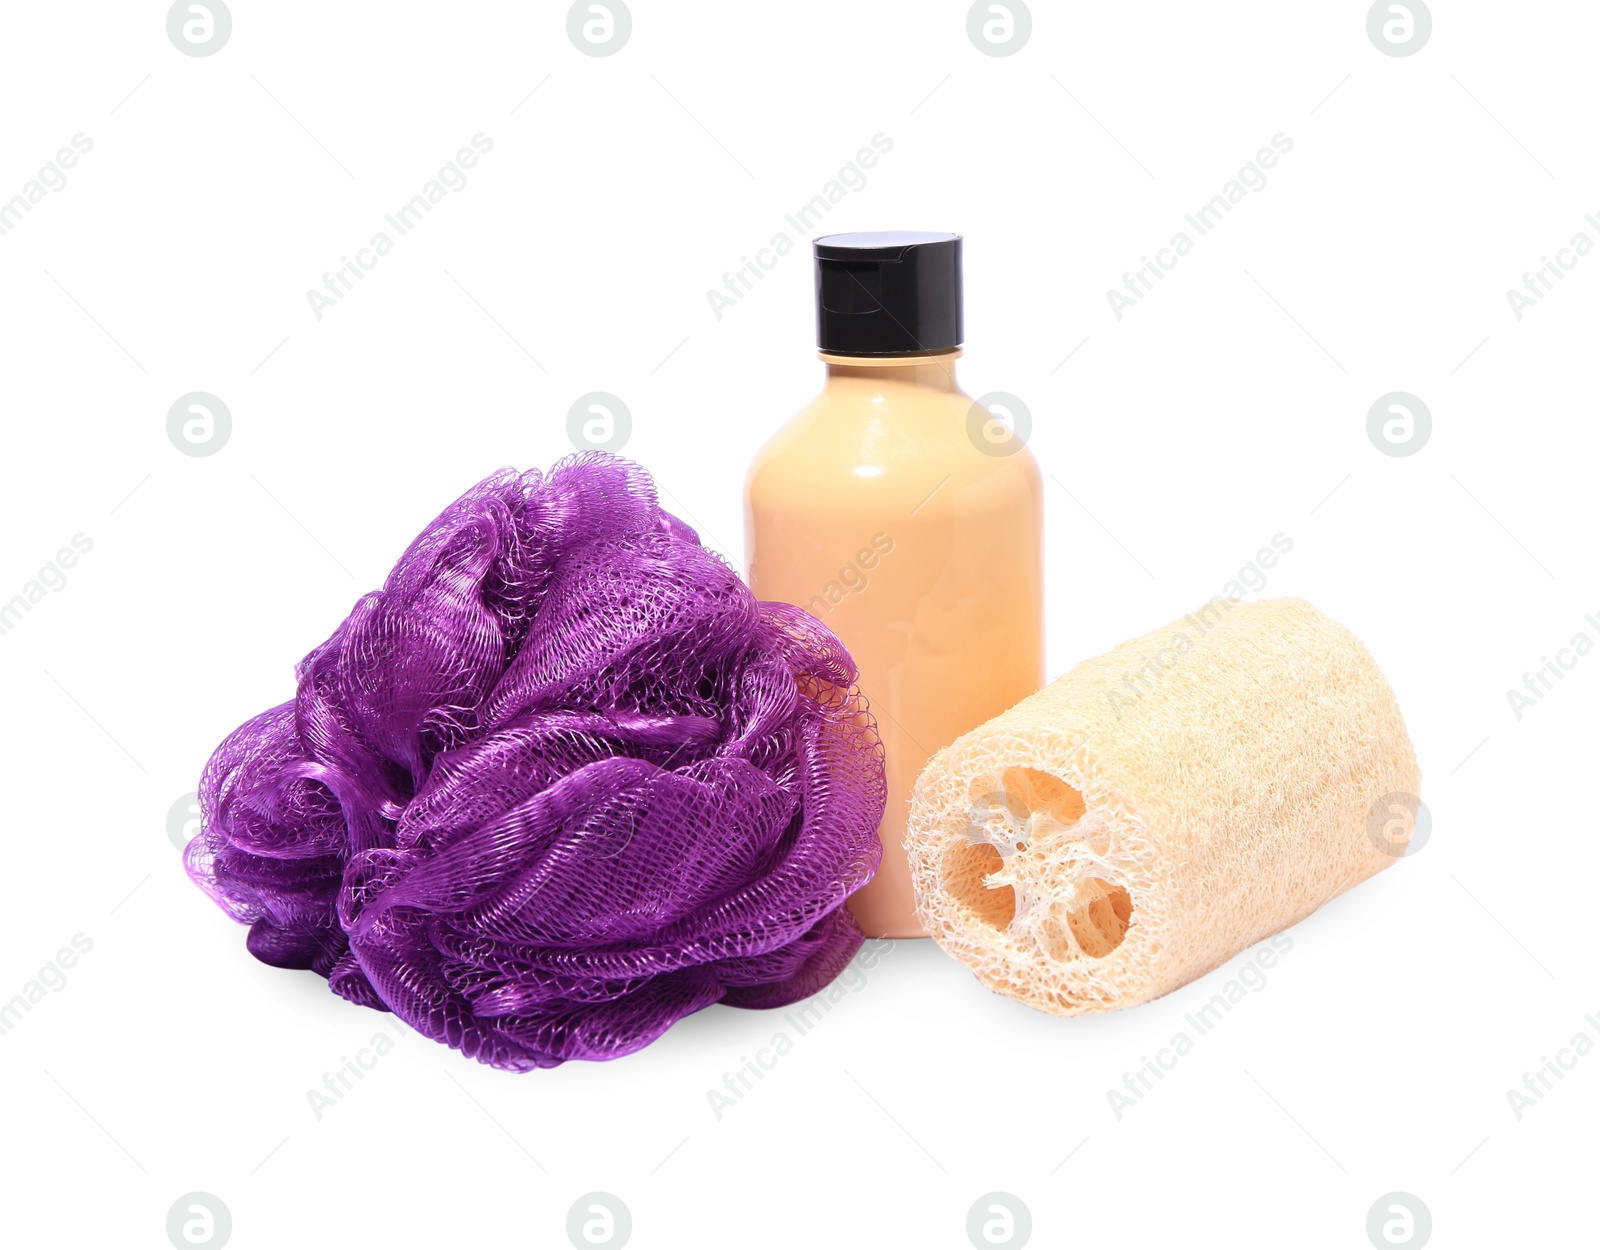 Photo of New shower puff, loofah sponge and bottle of cosmetic product on white background